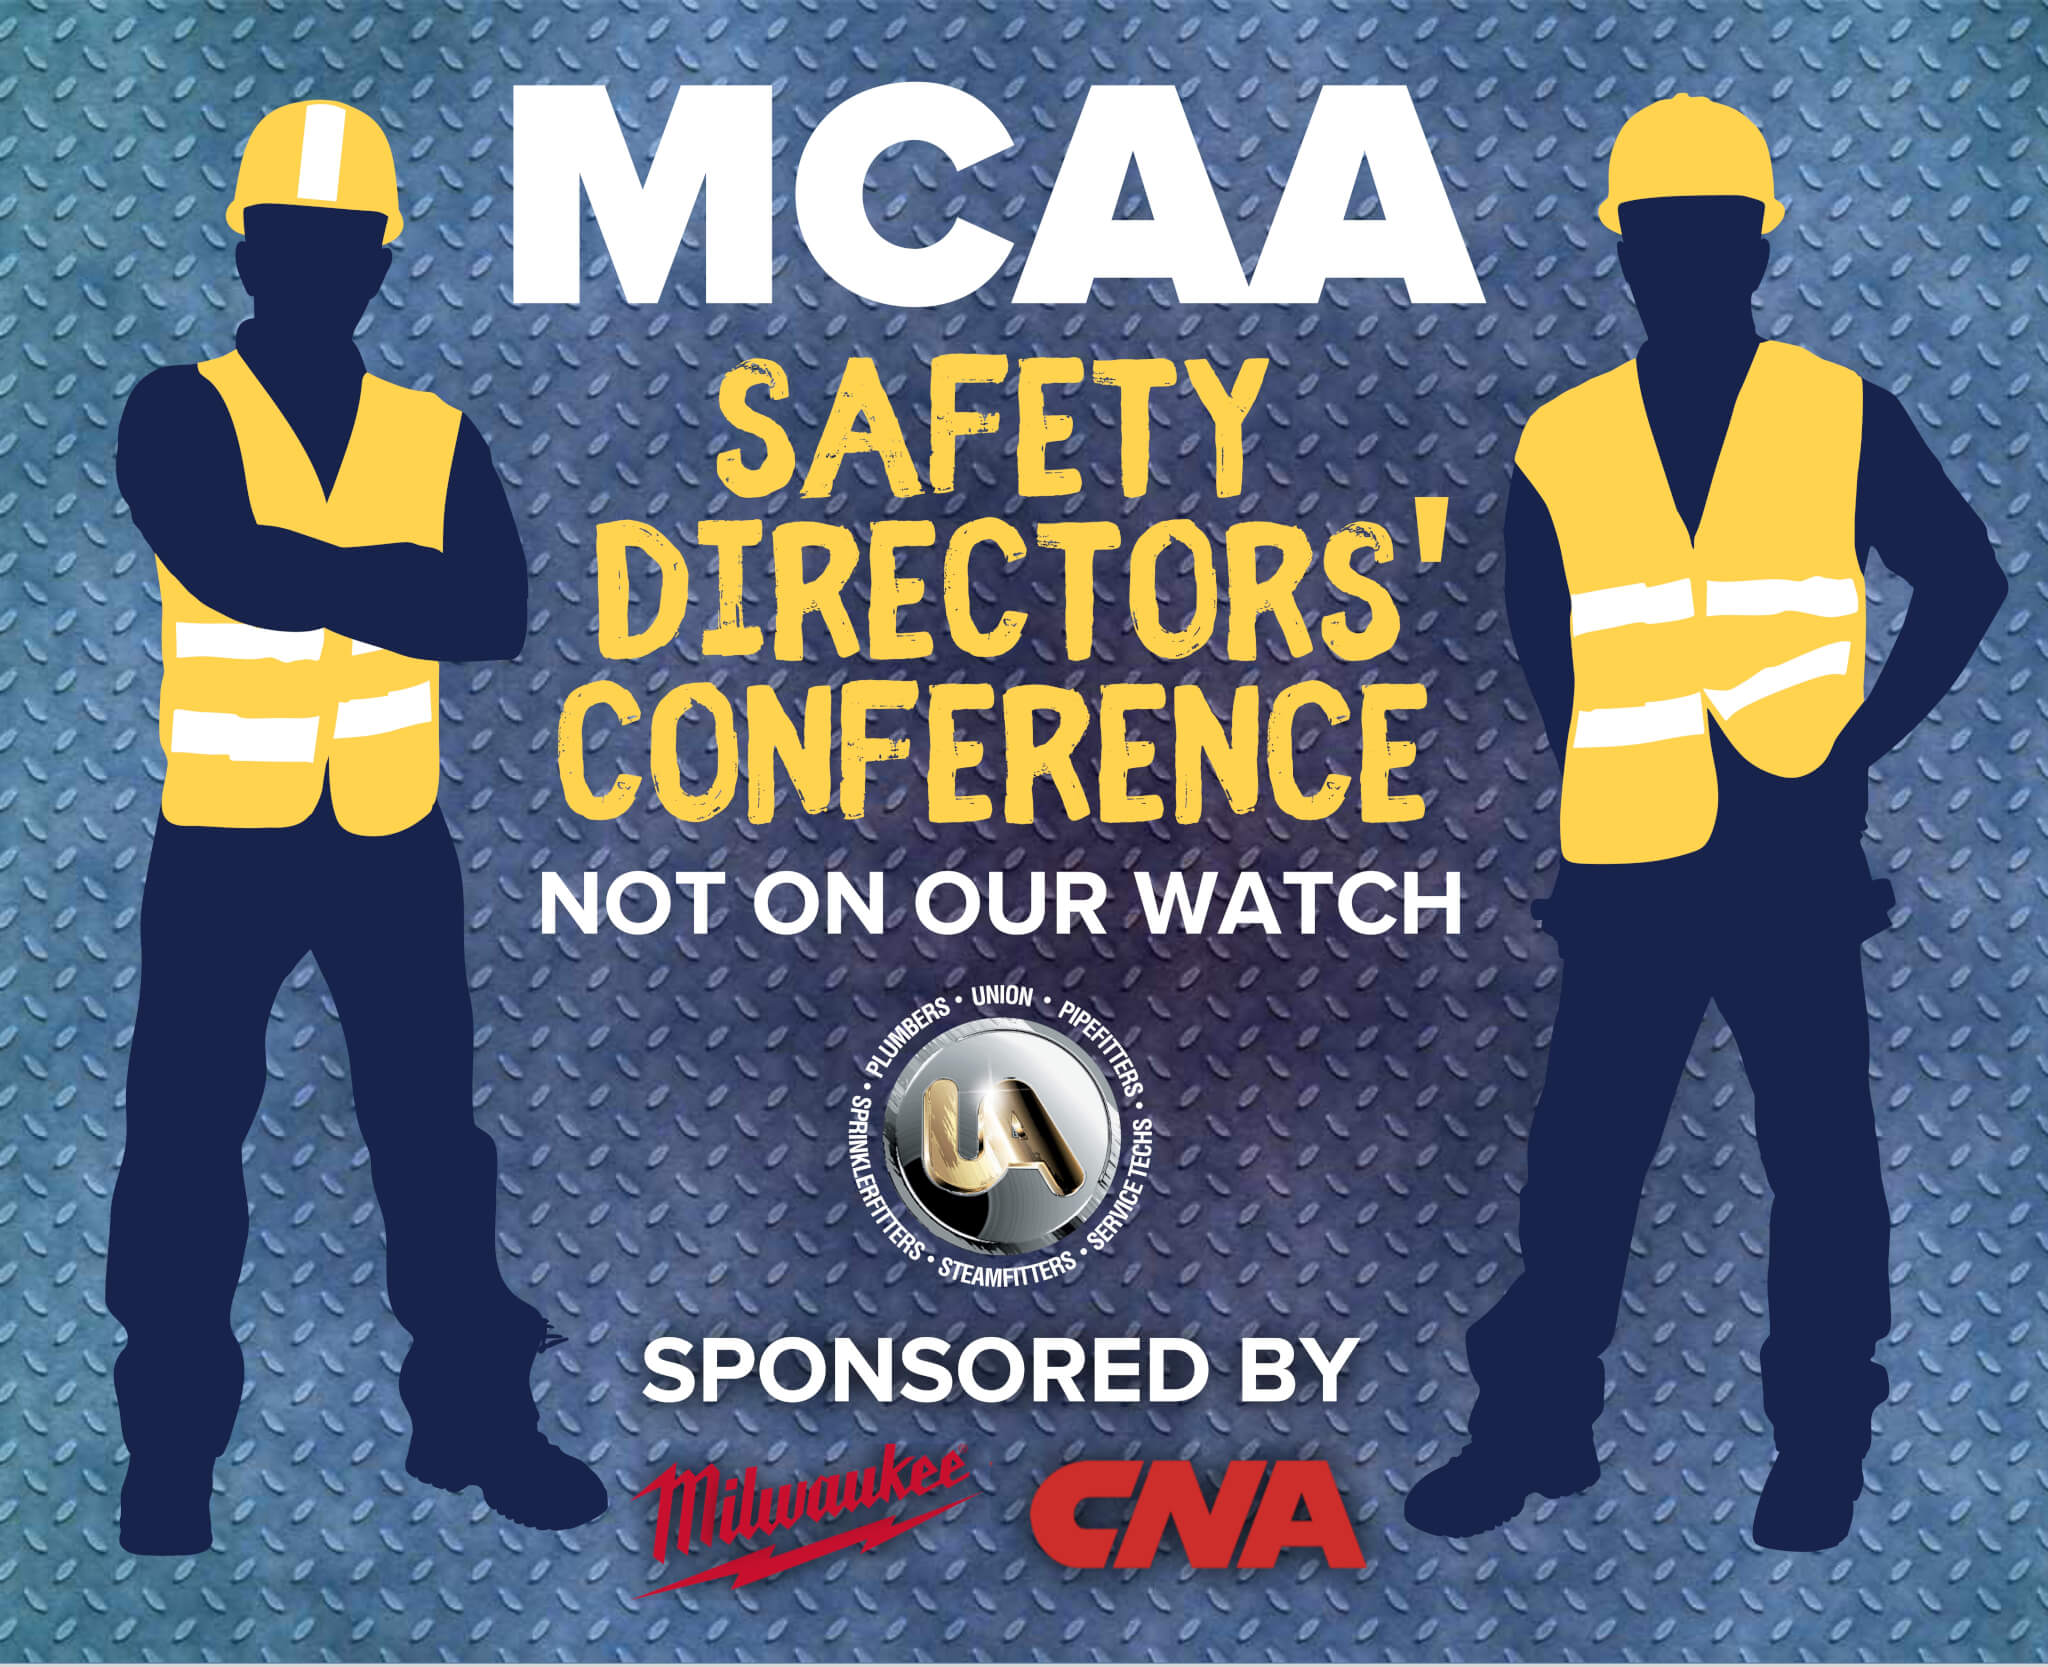 Safety Directors’ Conference Provides WorldClass Education MCAA